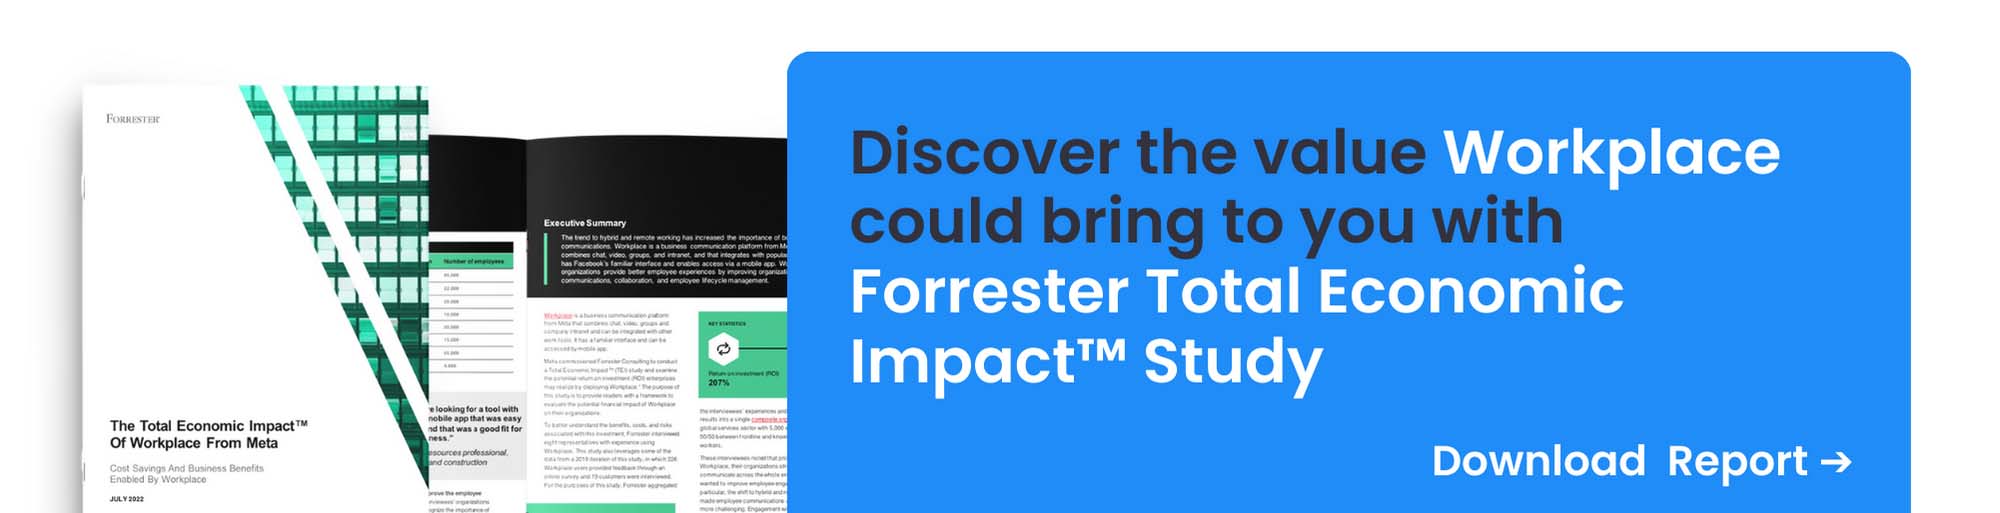 Workplace Forrester Total Economic Impact Study (2)